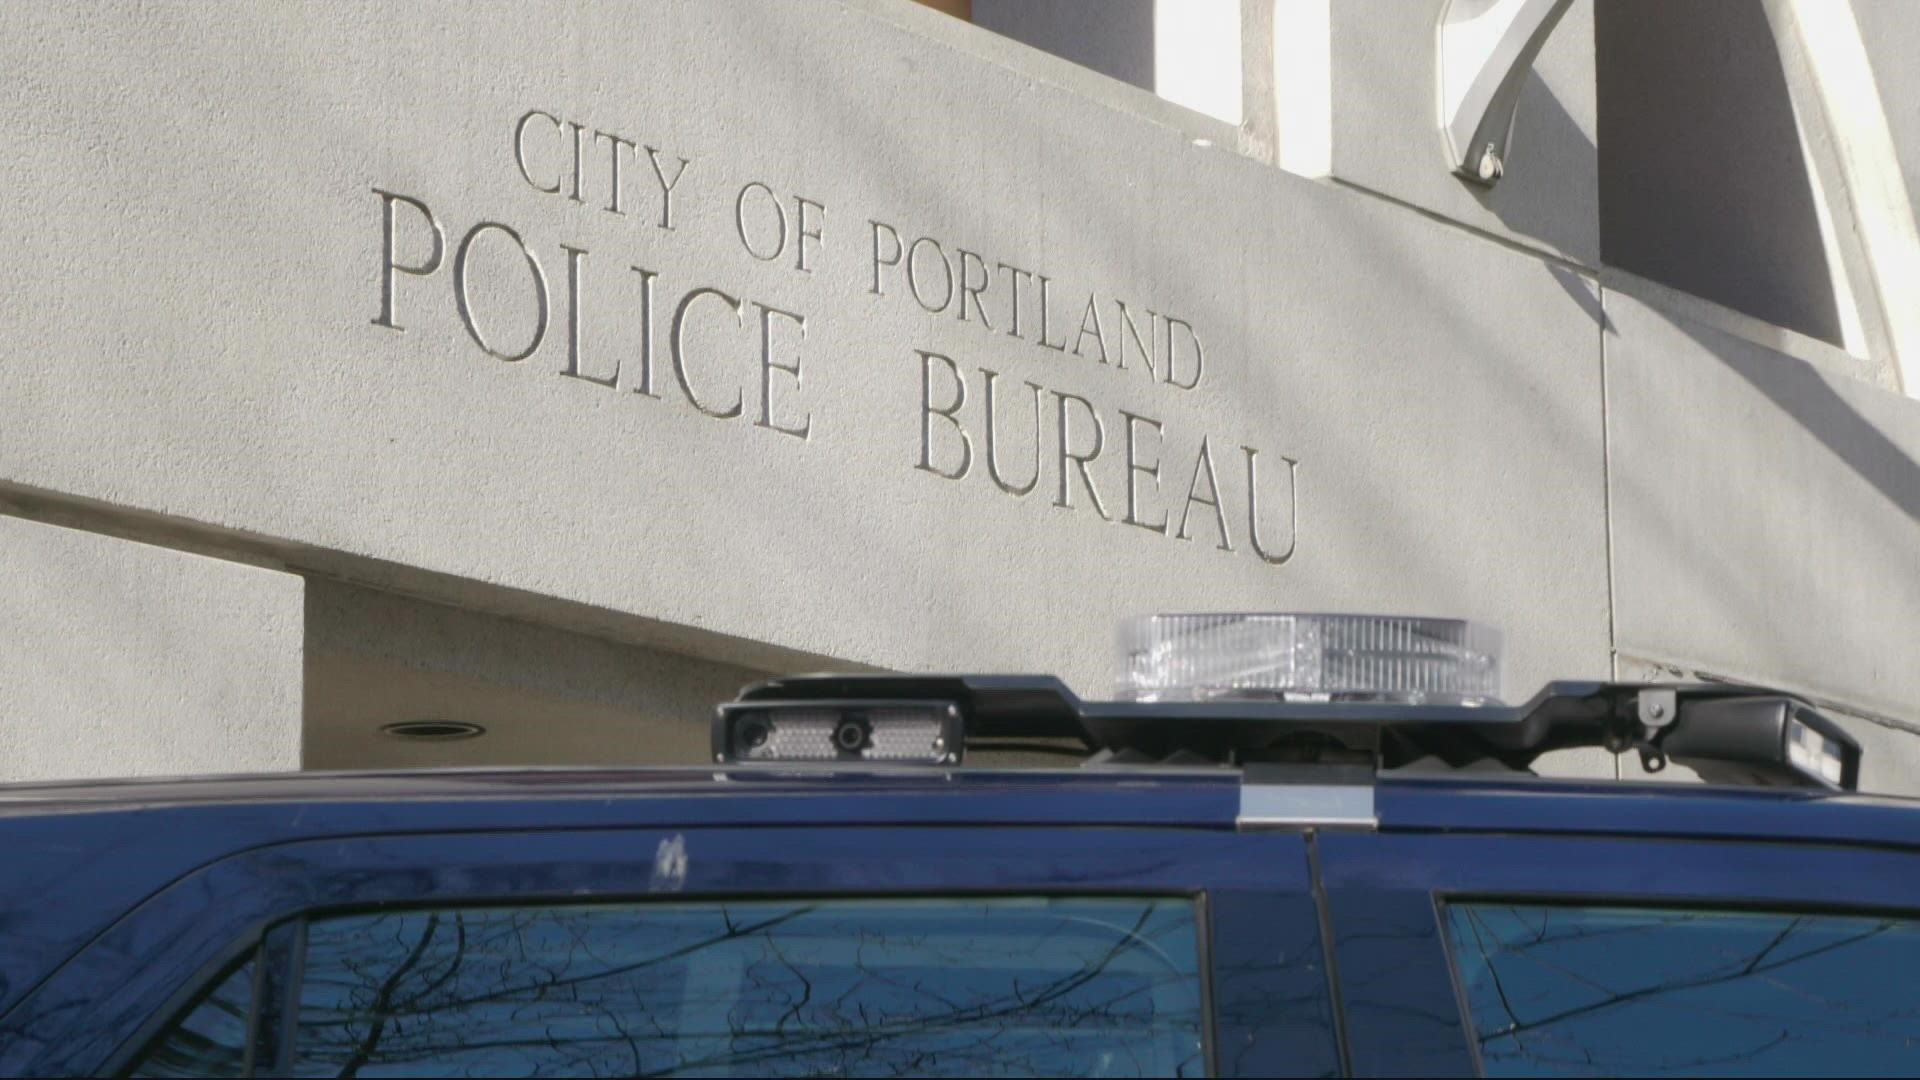 Mayor Ted Wheeler said he has directed the Portland Police Bureau to start researching what it will take to implement a body camera program.